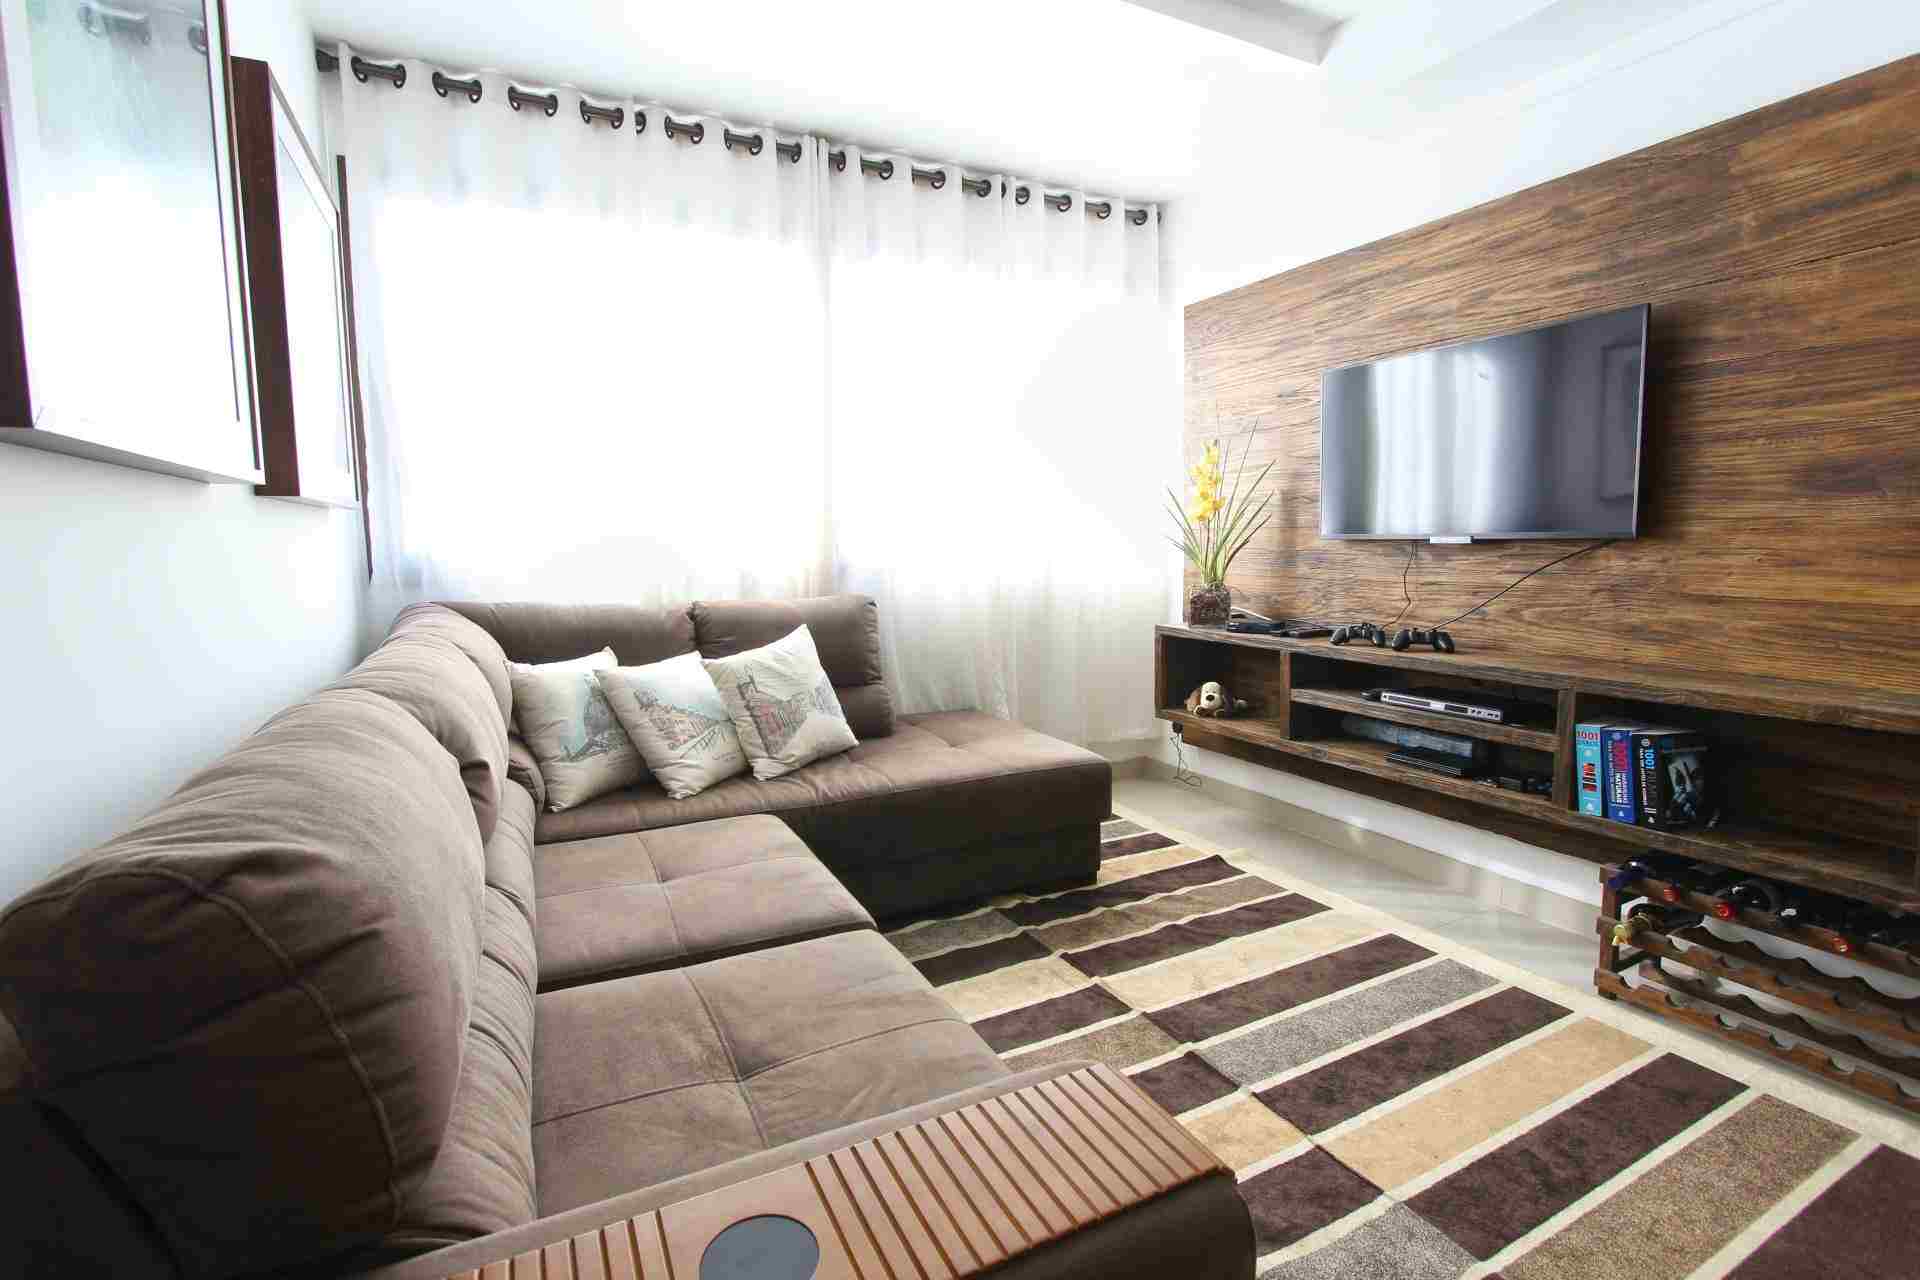 Contemporary living room featuring a brown sectional sofa, striped rug, and wooden TV console.